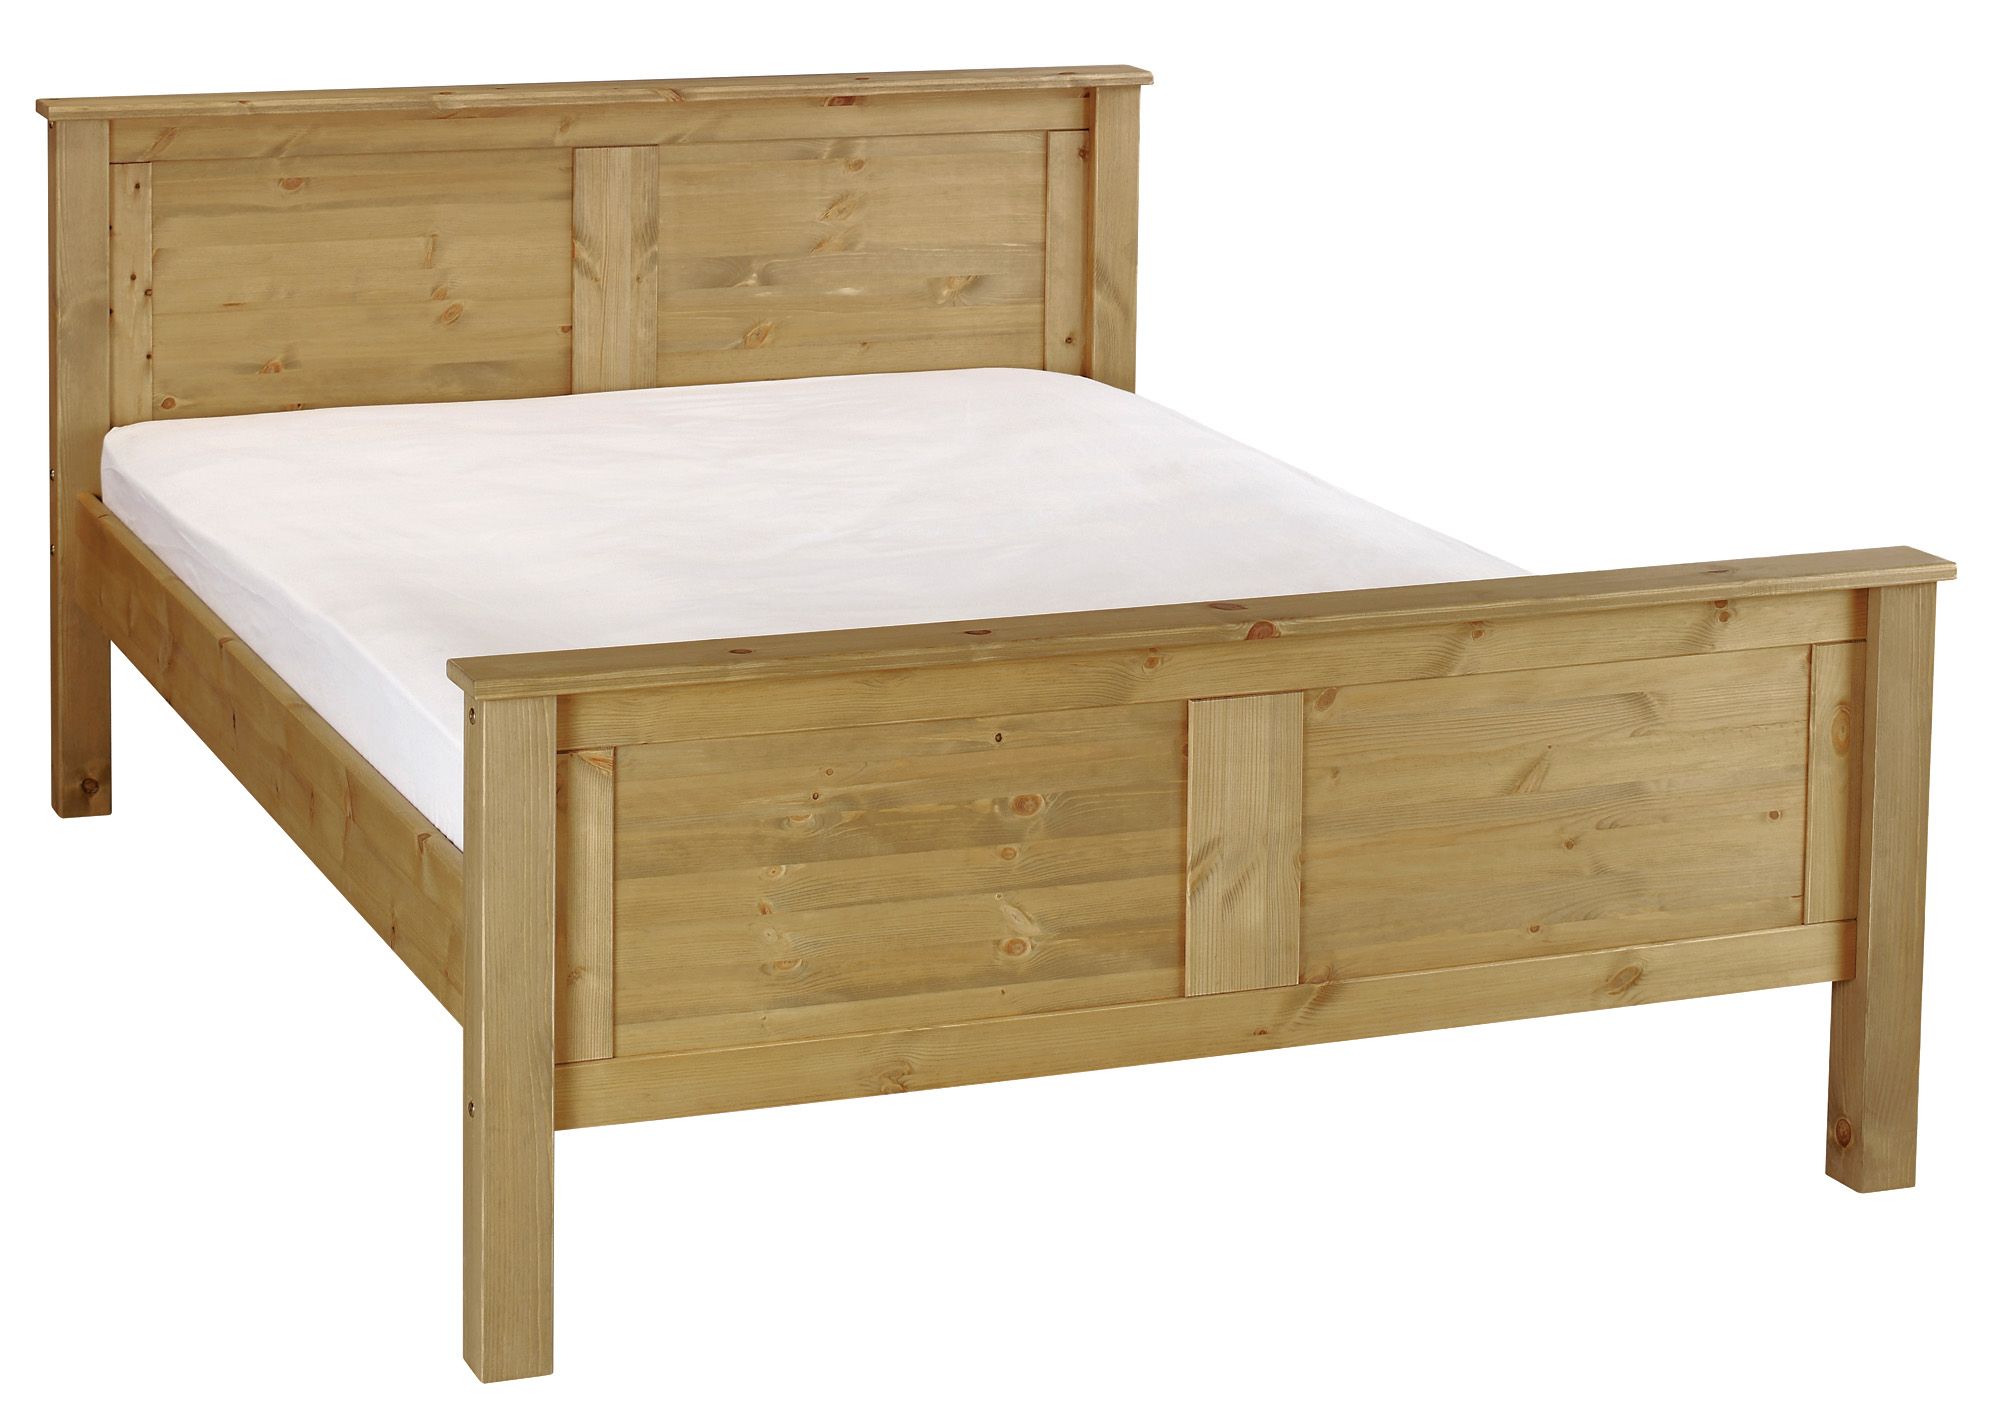 B&Q Compton Stained pine oak effect Double Bed frame (W)1507mm